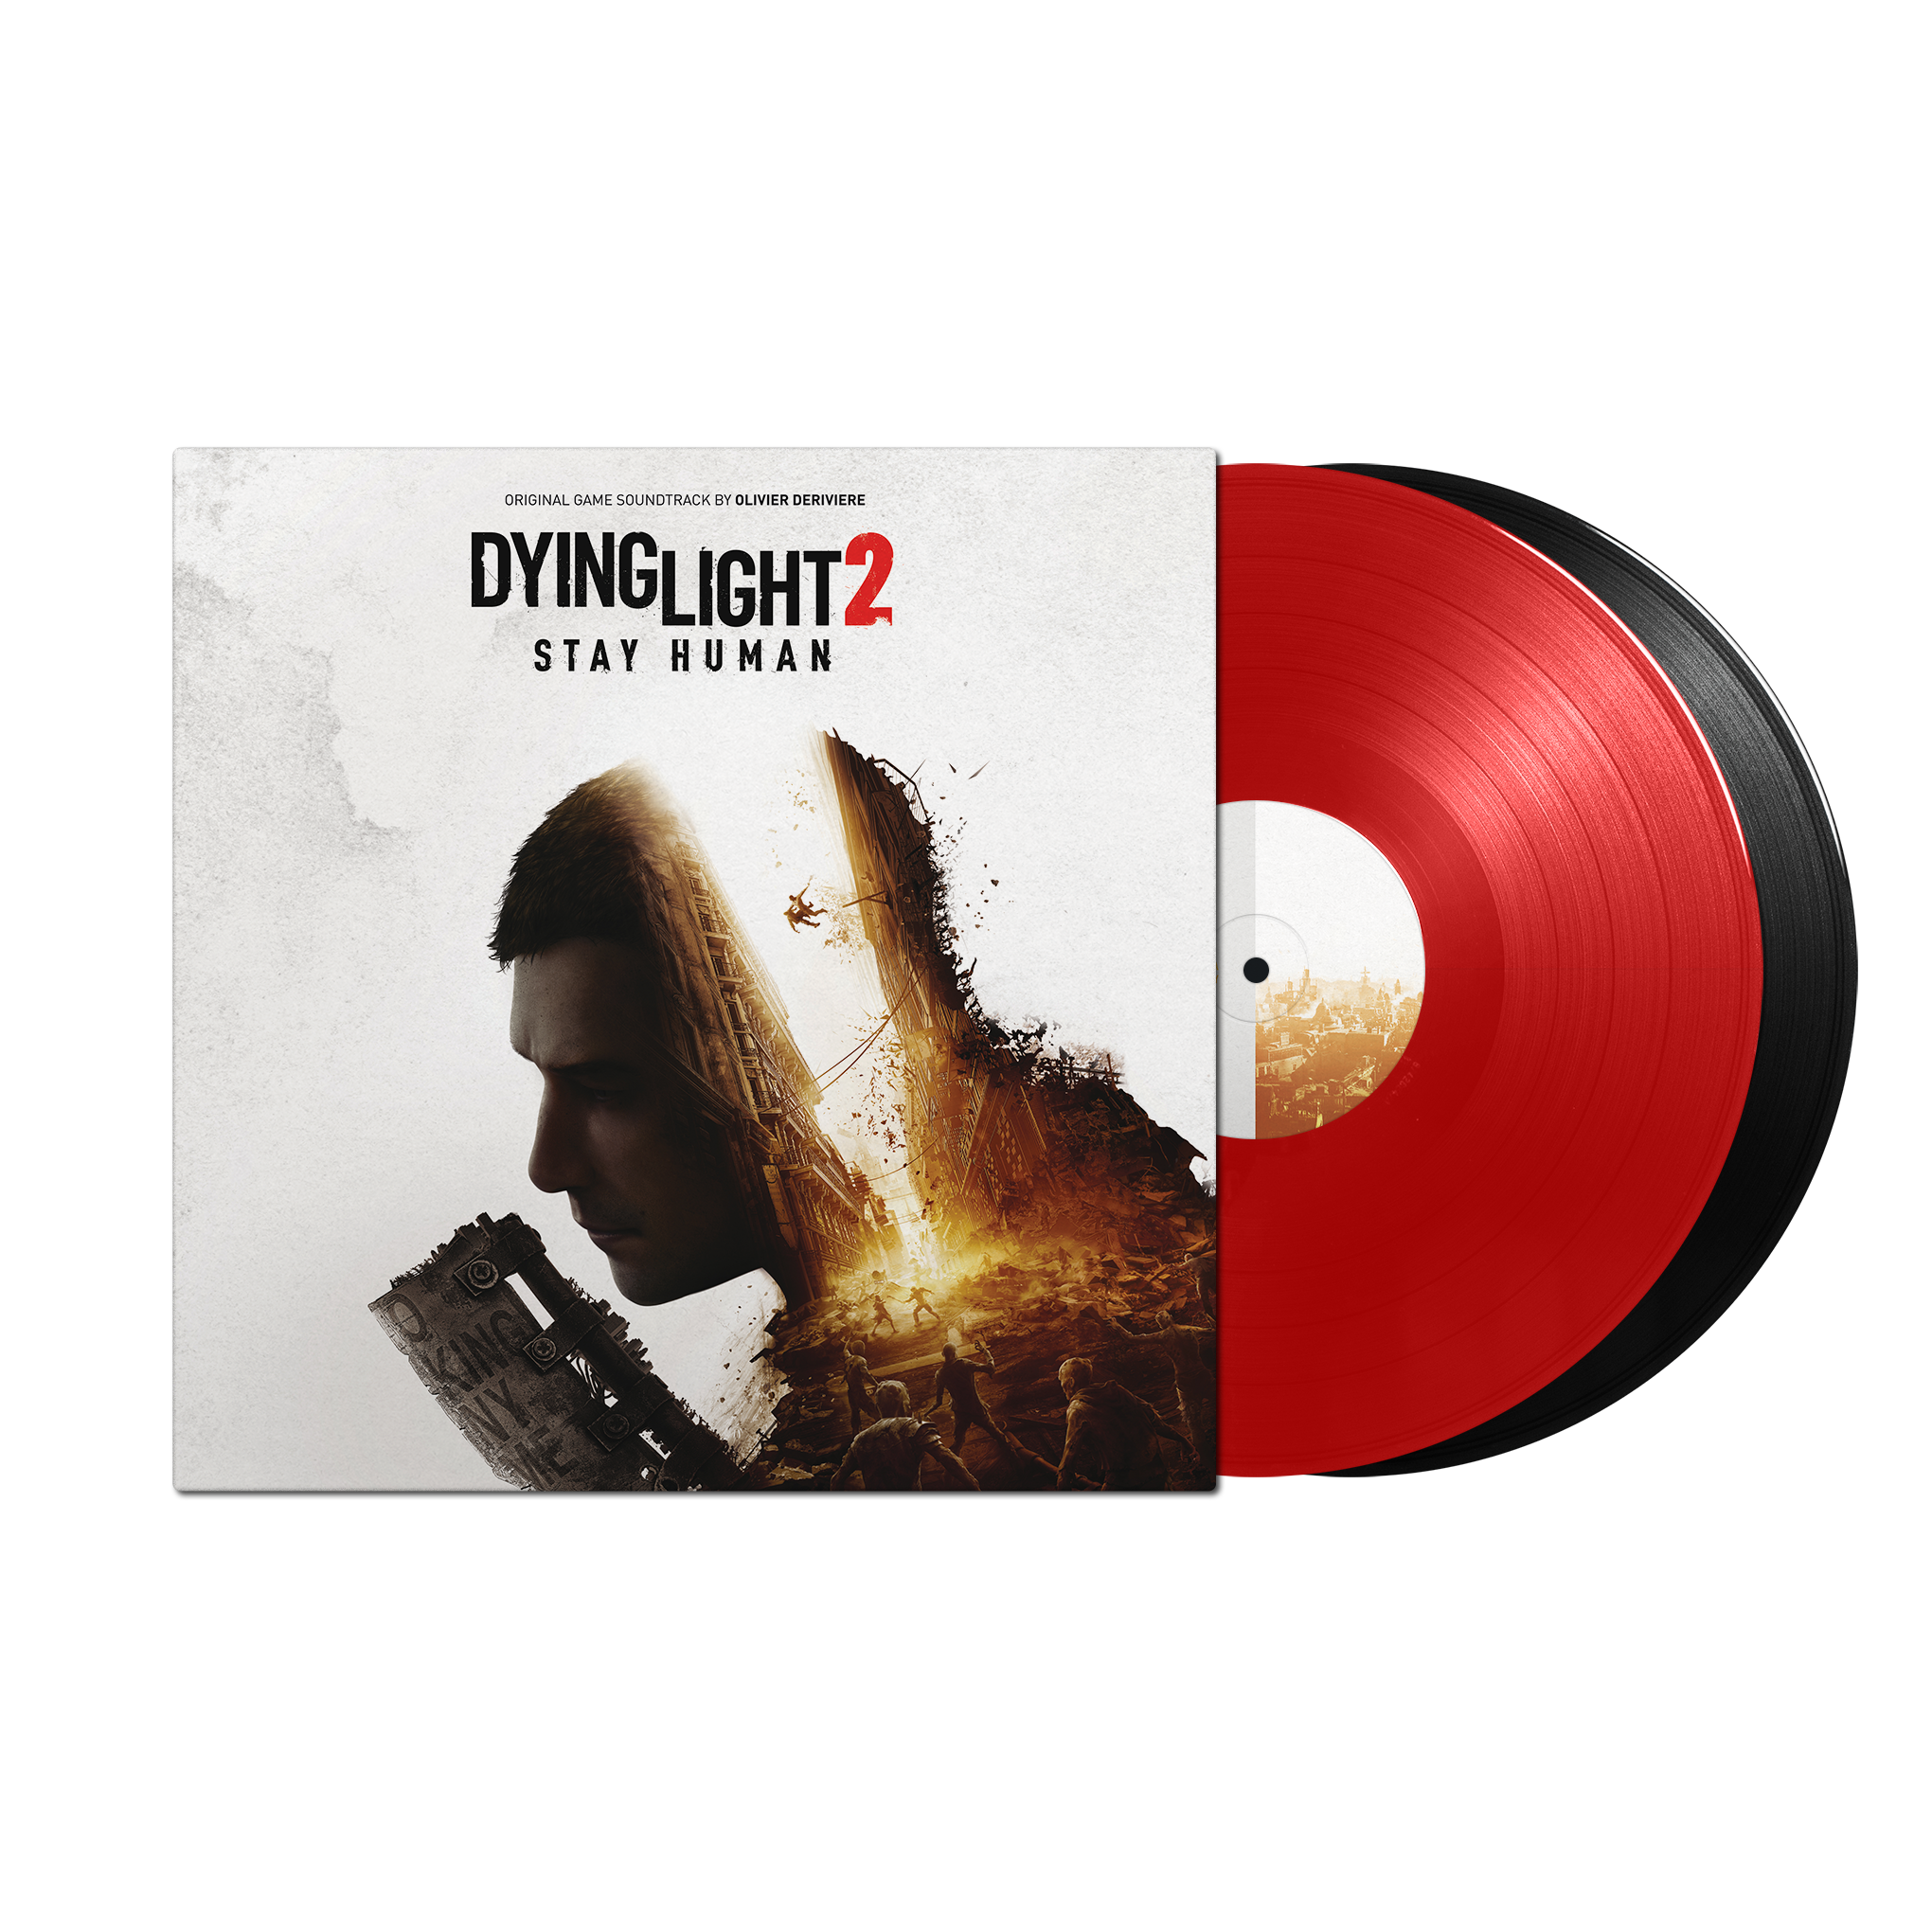 Editions of Dying Light 2, Dying Light Wiki